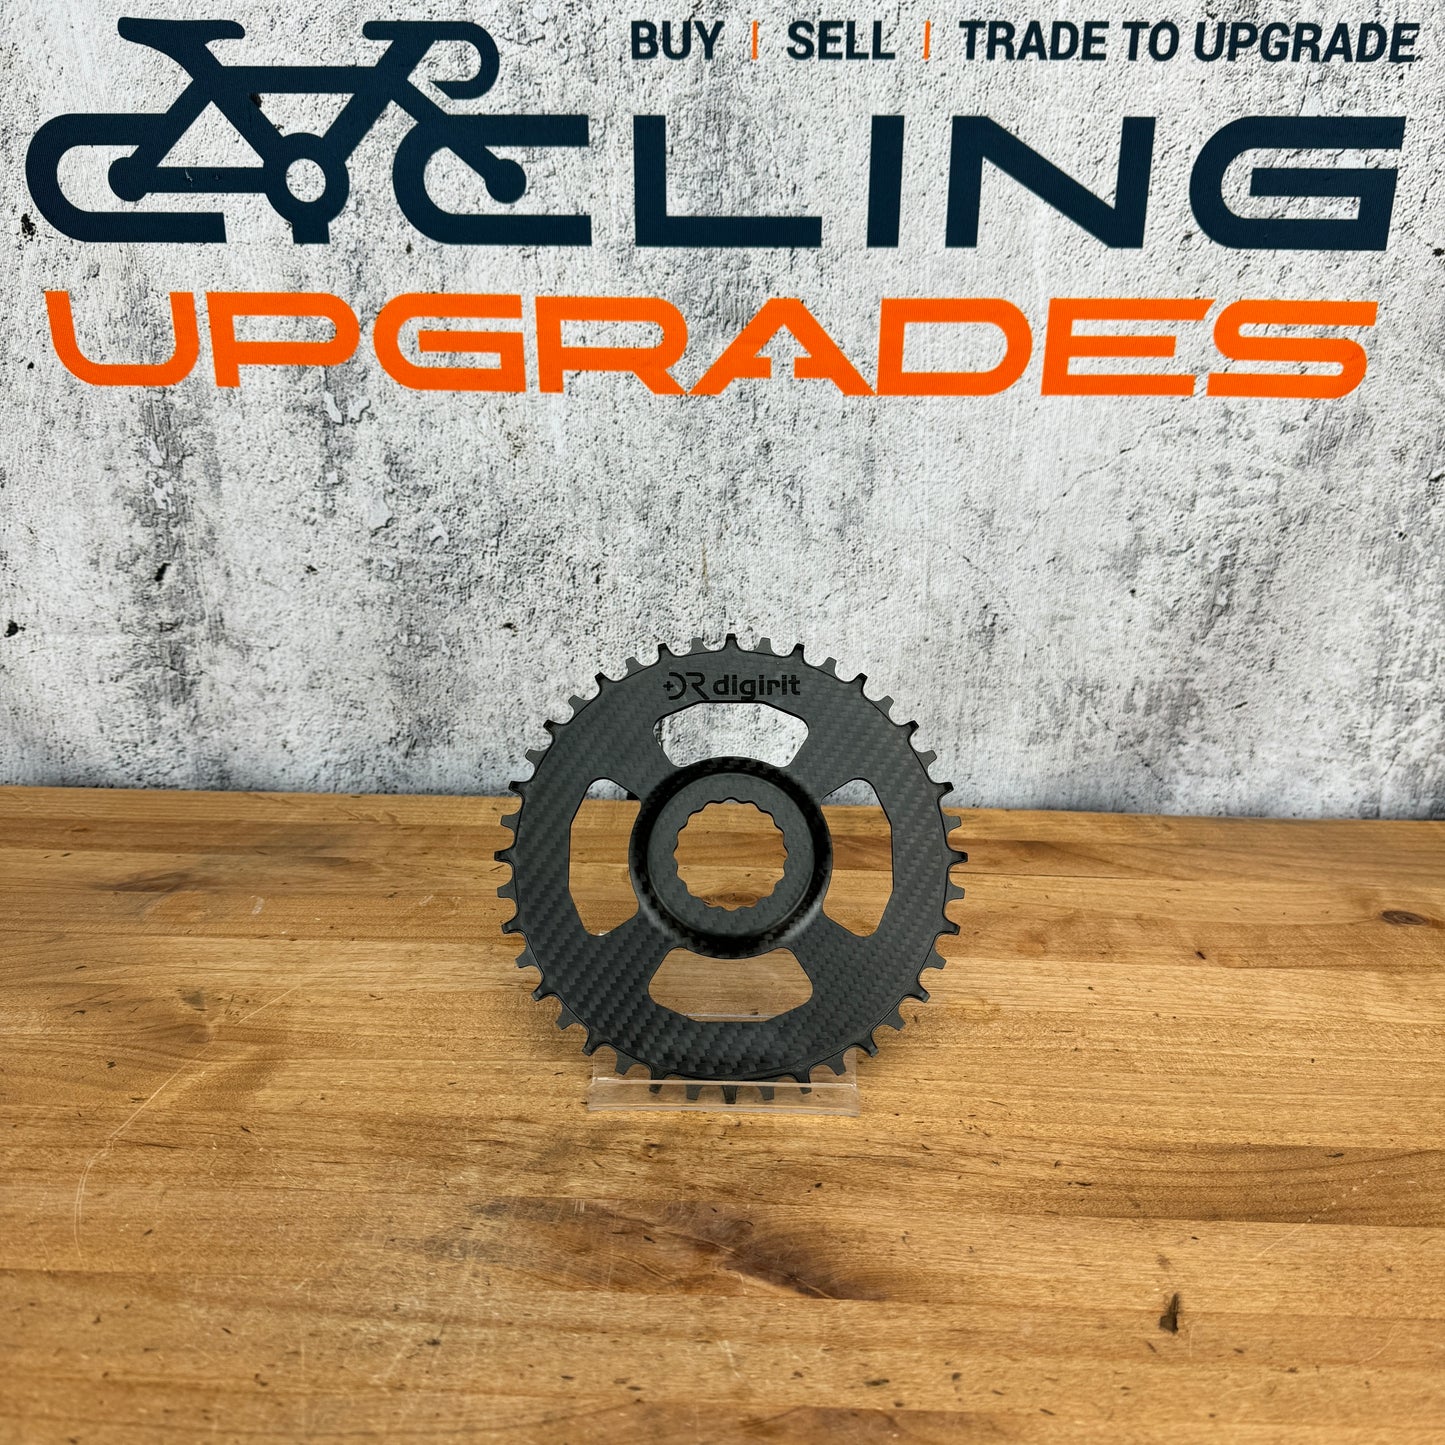 New Takeoff! Digirit Carbon 40t 1x -6mm Offset Single Chainring Easton/Cinch 86g